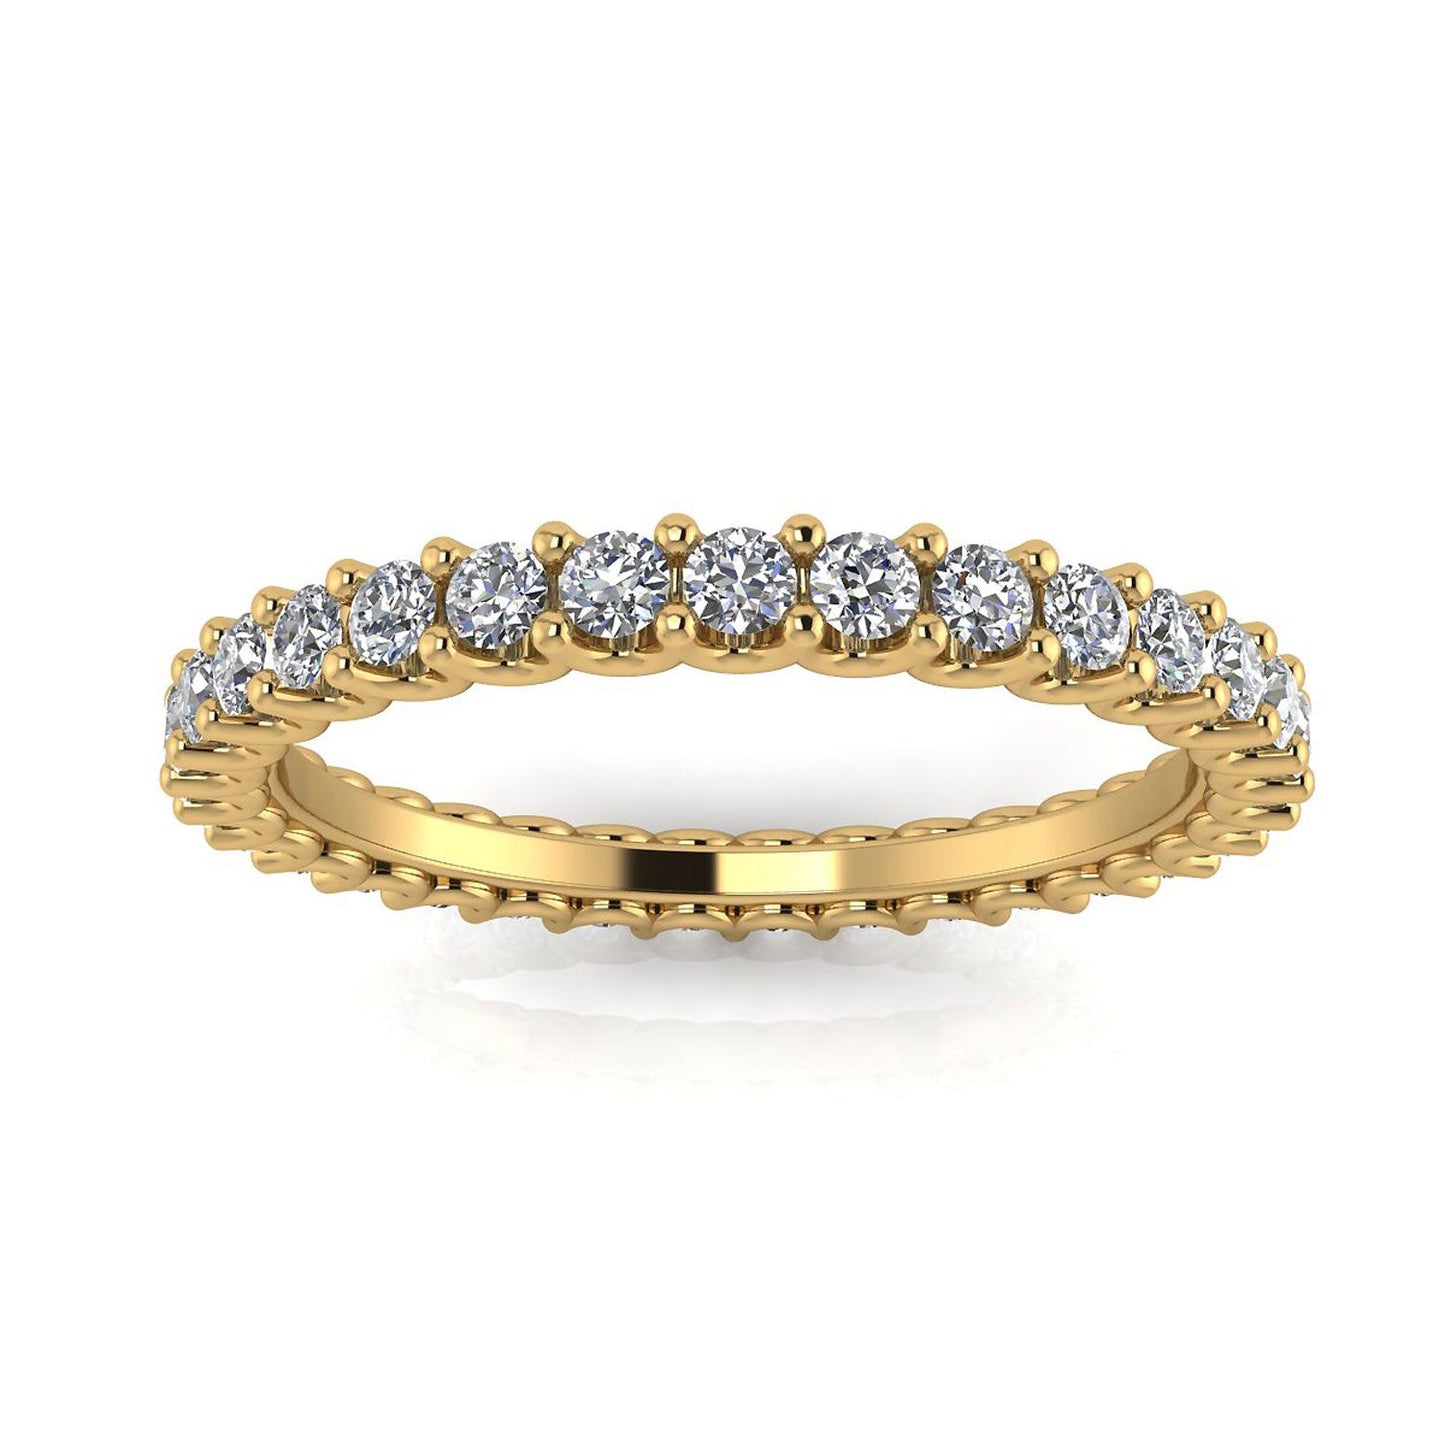 Round Brilliant Cut Diamond Shared Prong Set Eternity Ring In 14k Yellow Gold  (0.77ct. Tw.) Ring Size 9